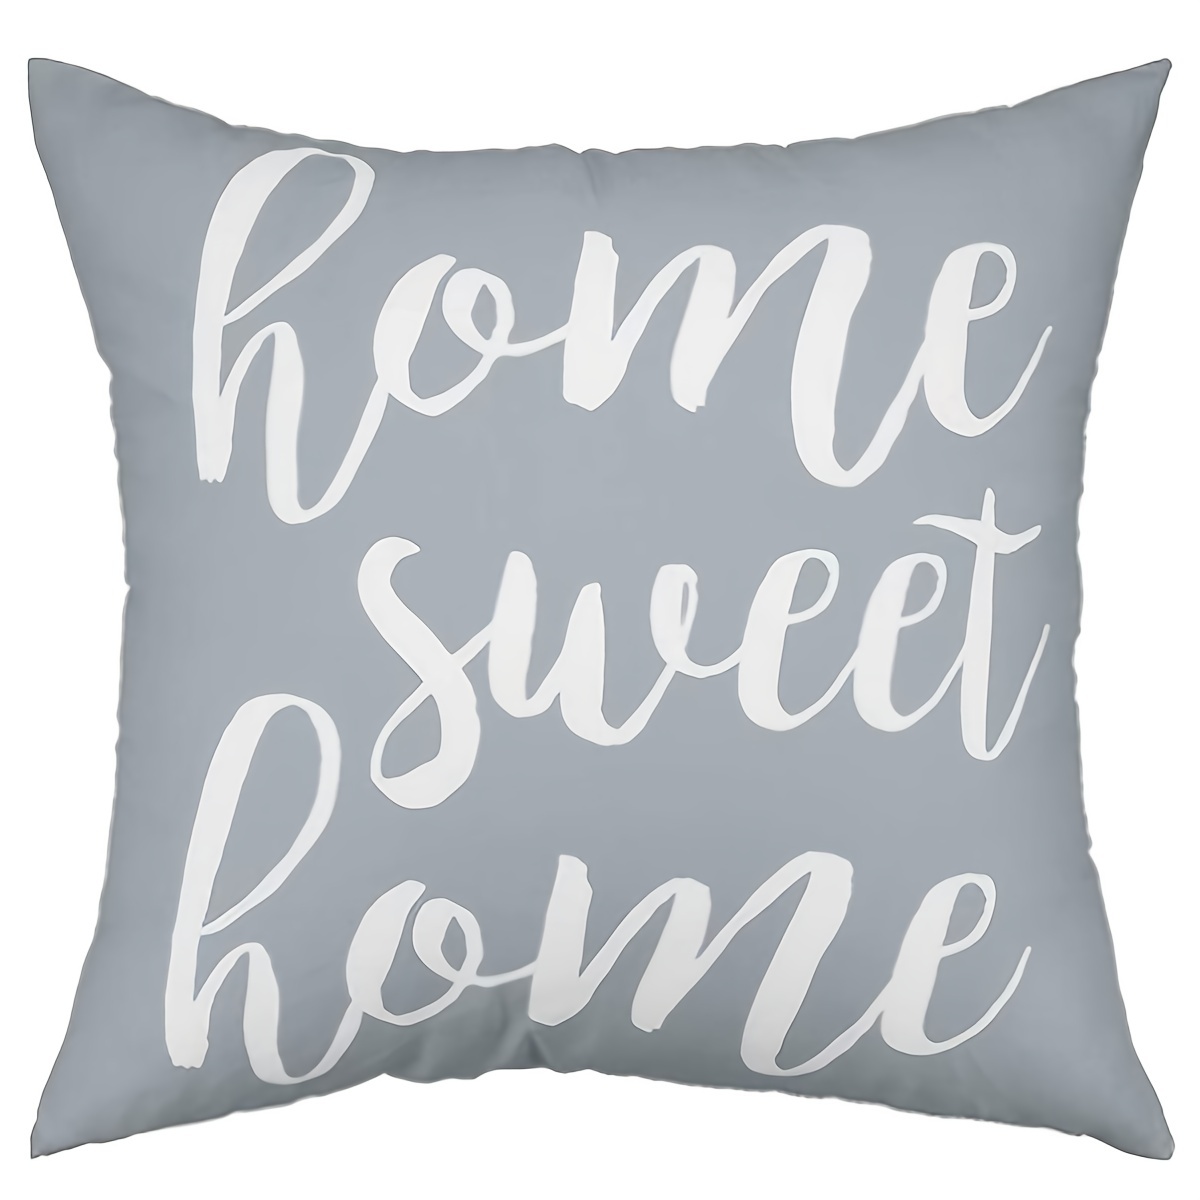 Throw Pillow Inserts (Set of 6, White), 18 X 18 Inches Pillow